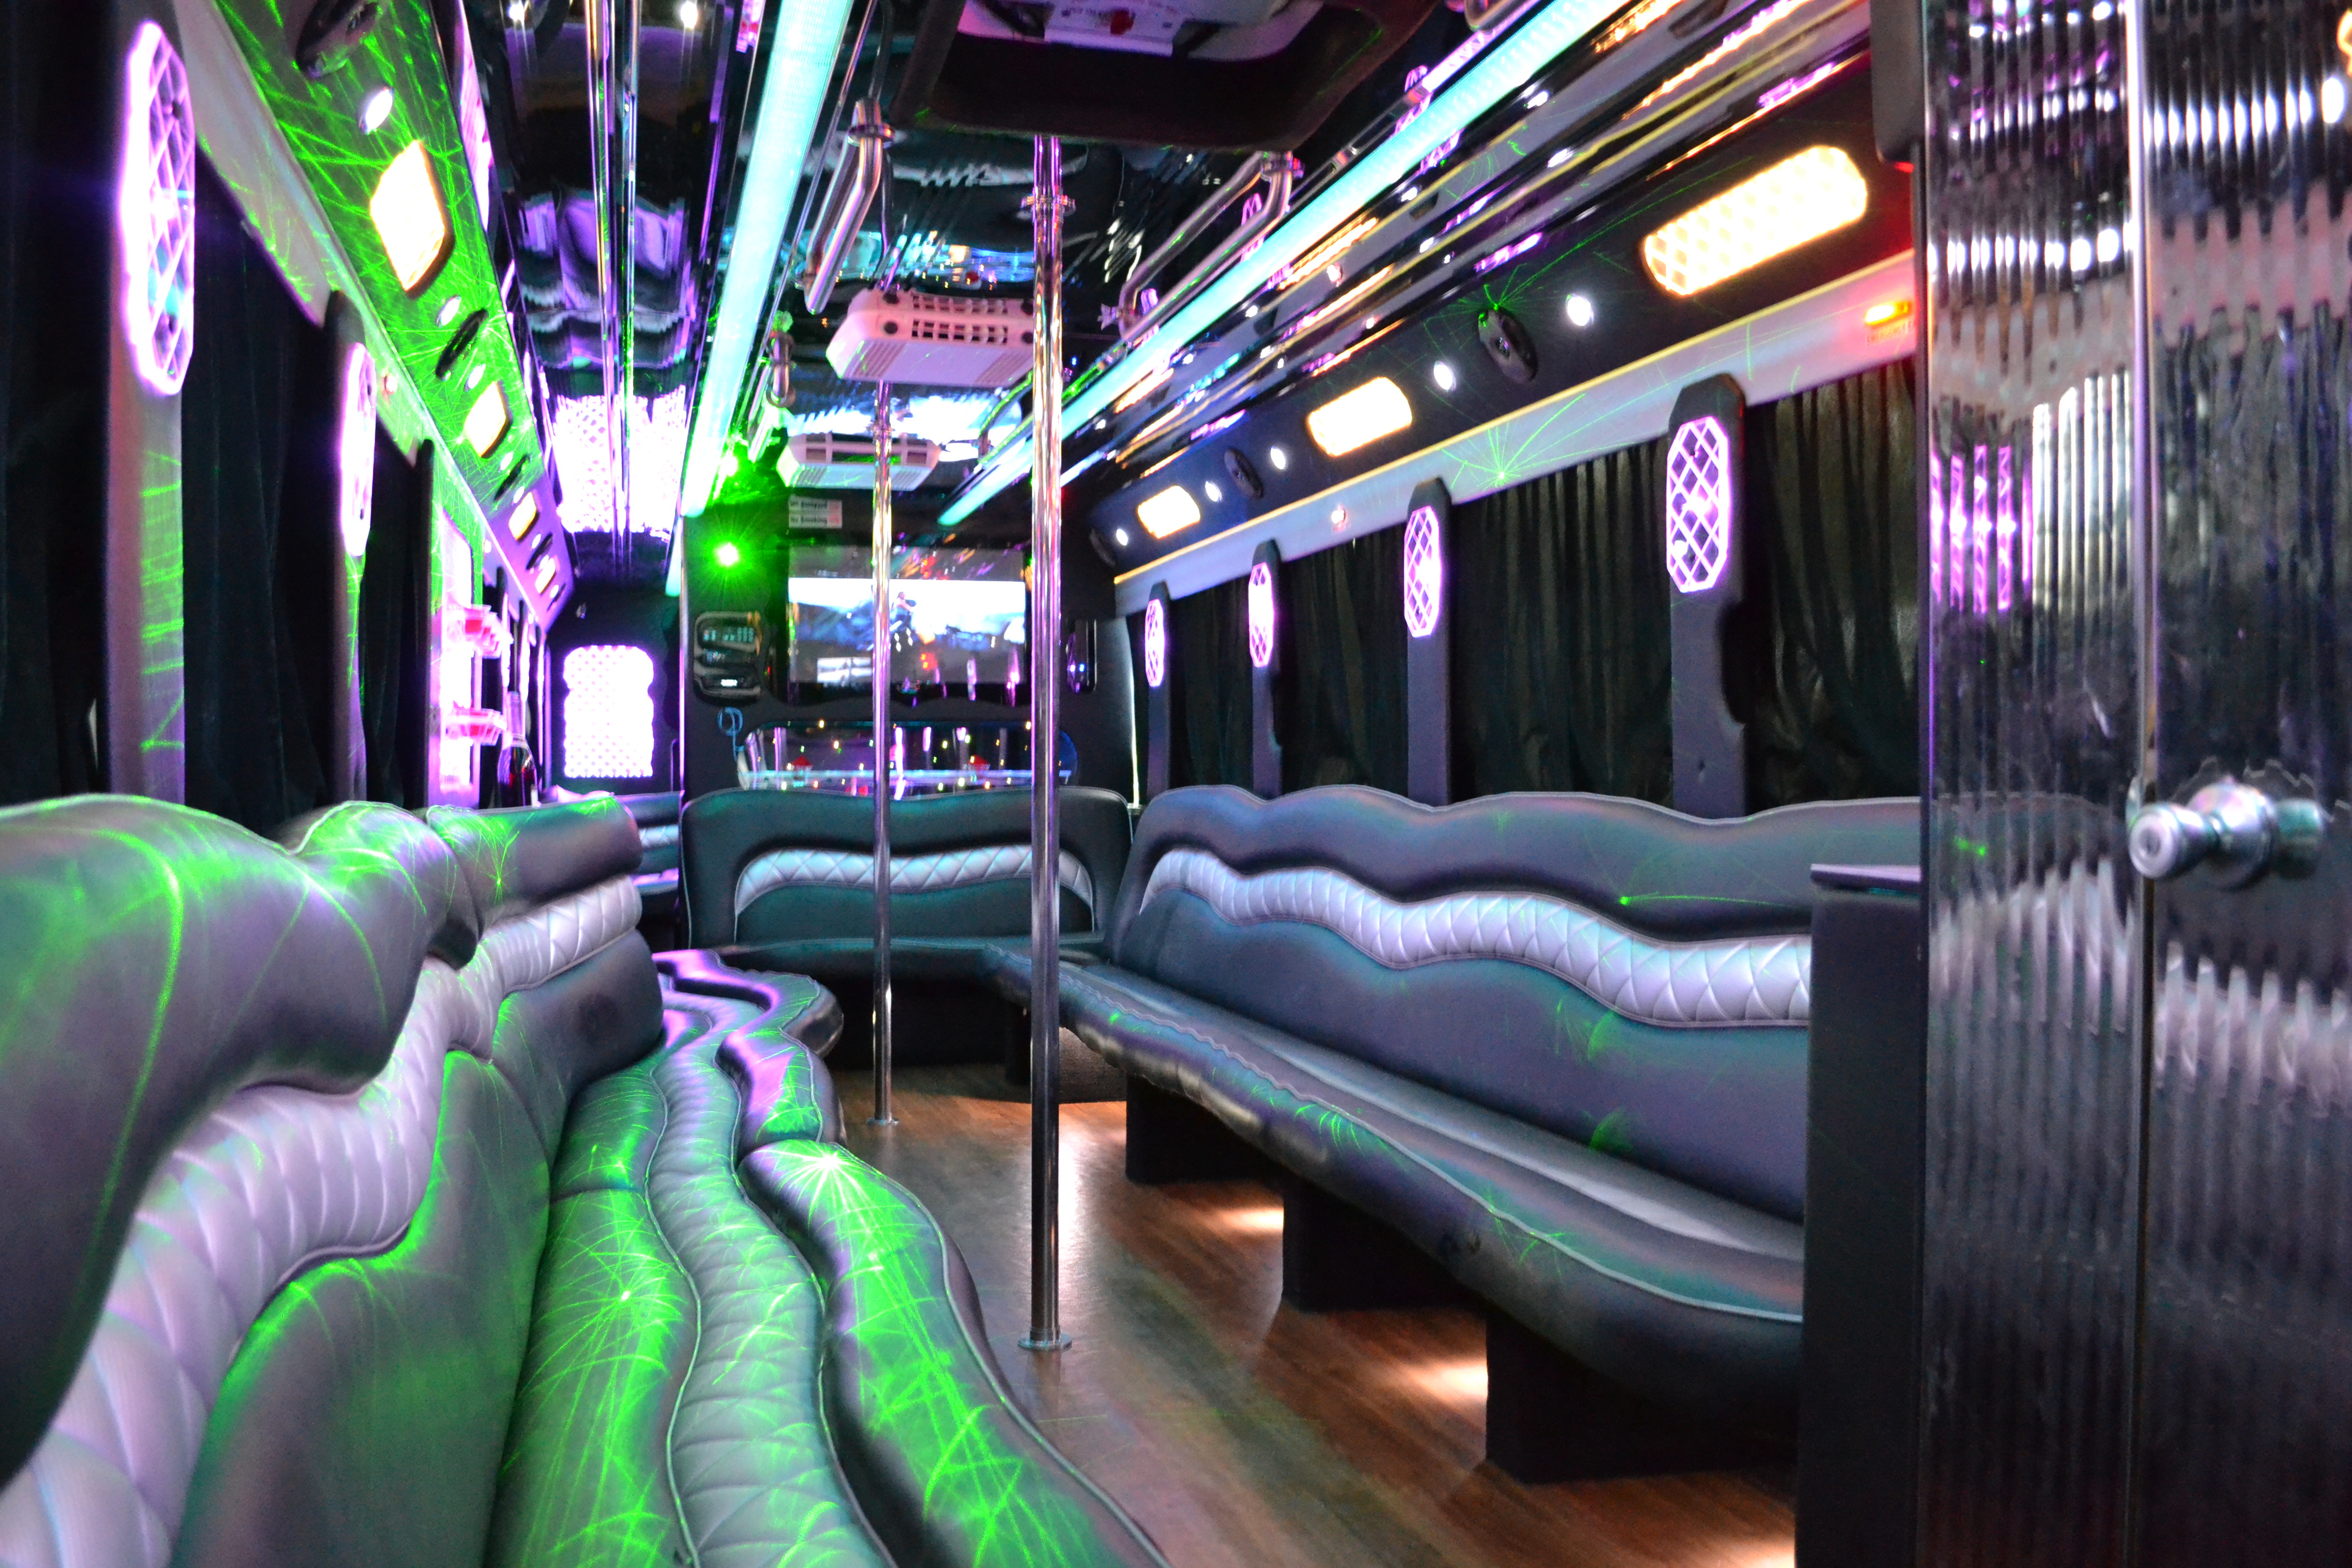 50 Pax party bus with a VIP Room